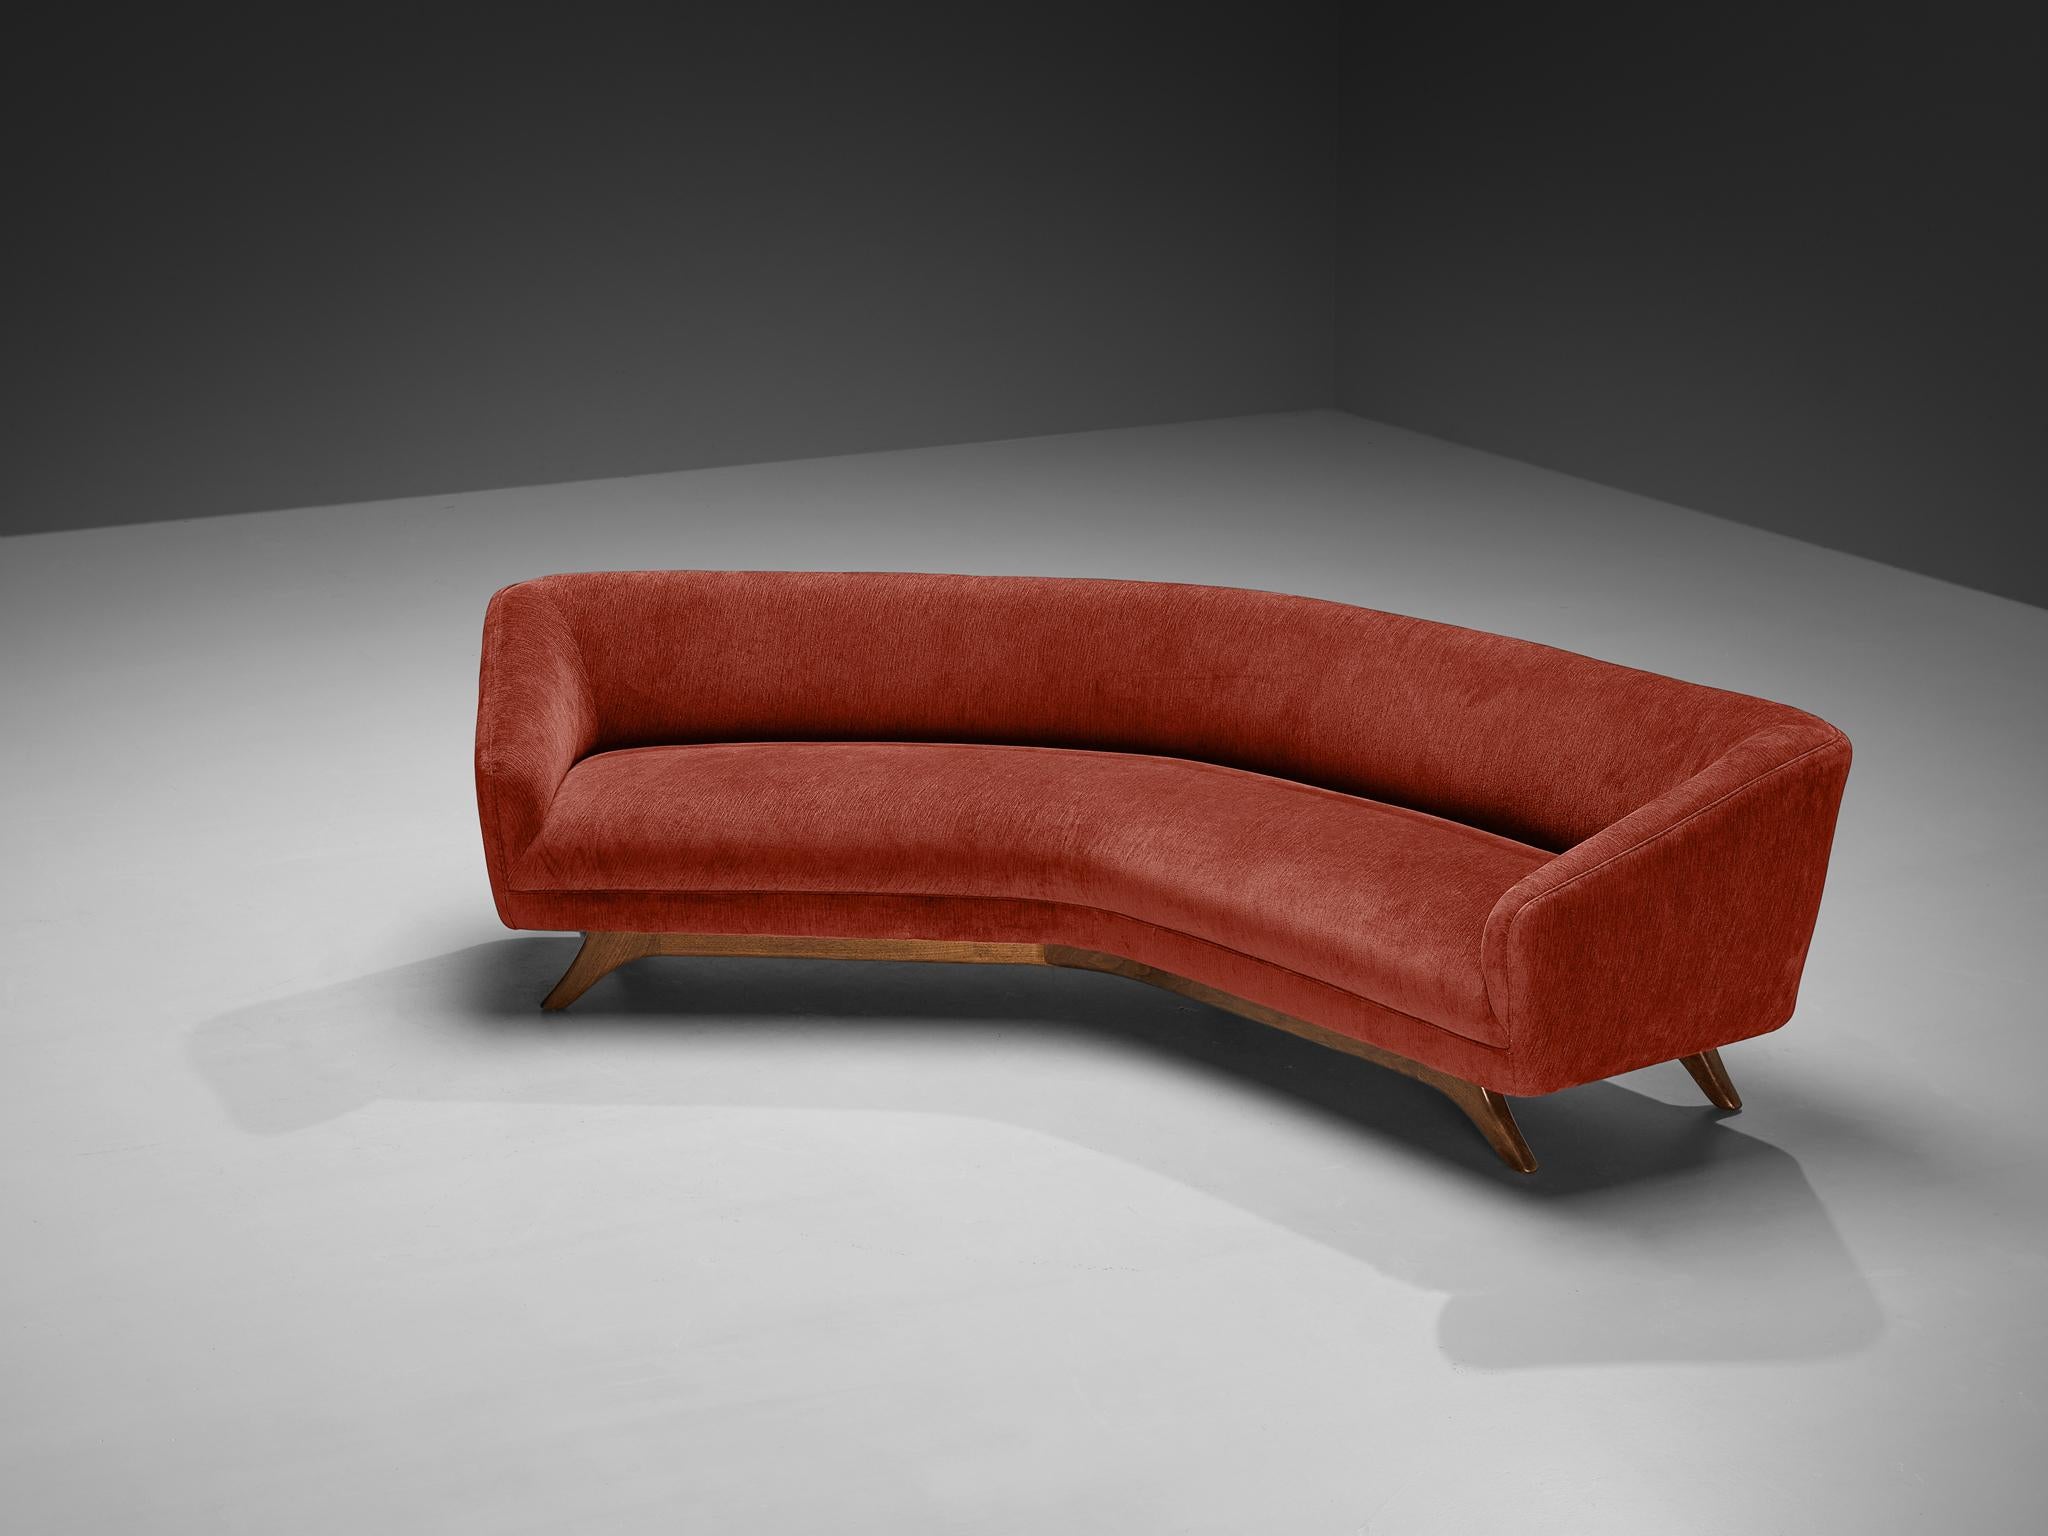 Late 20th Century Vladimir Kagan 'Wide Angle' Sofa in Red Brown Upholstery and Walnut  For Sale